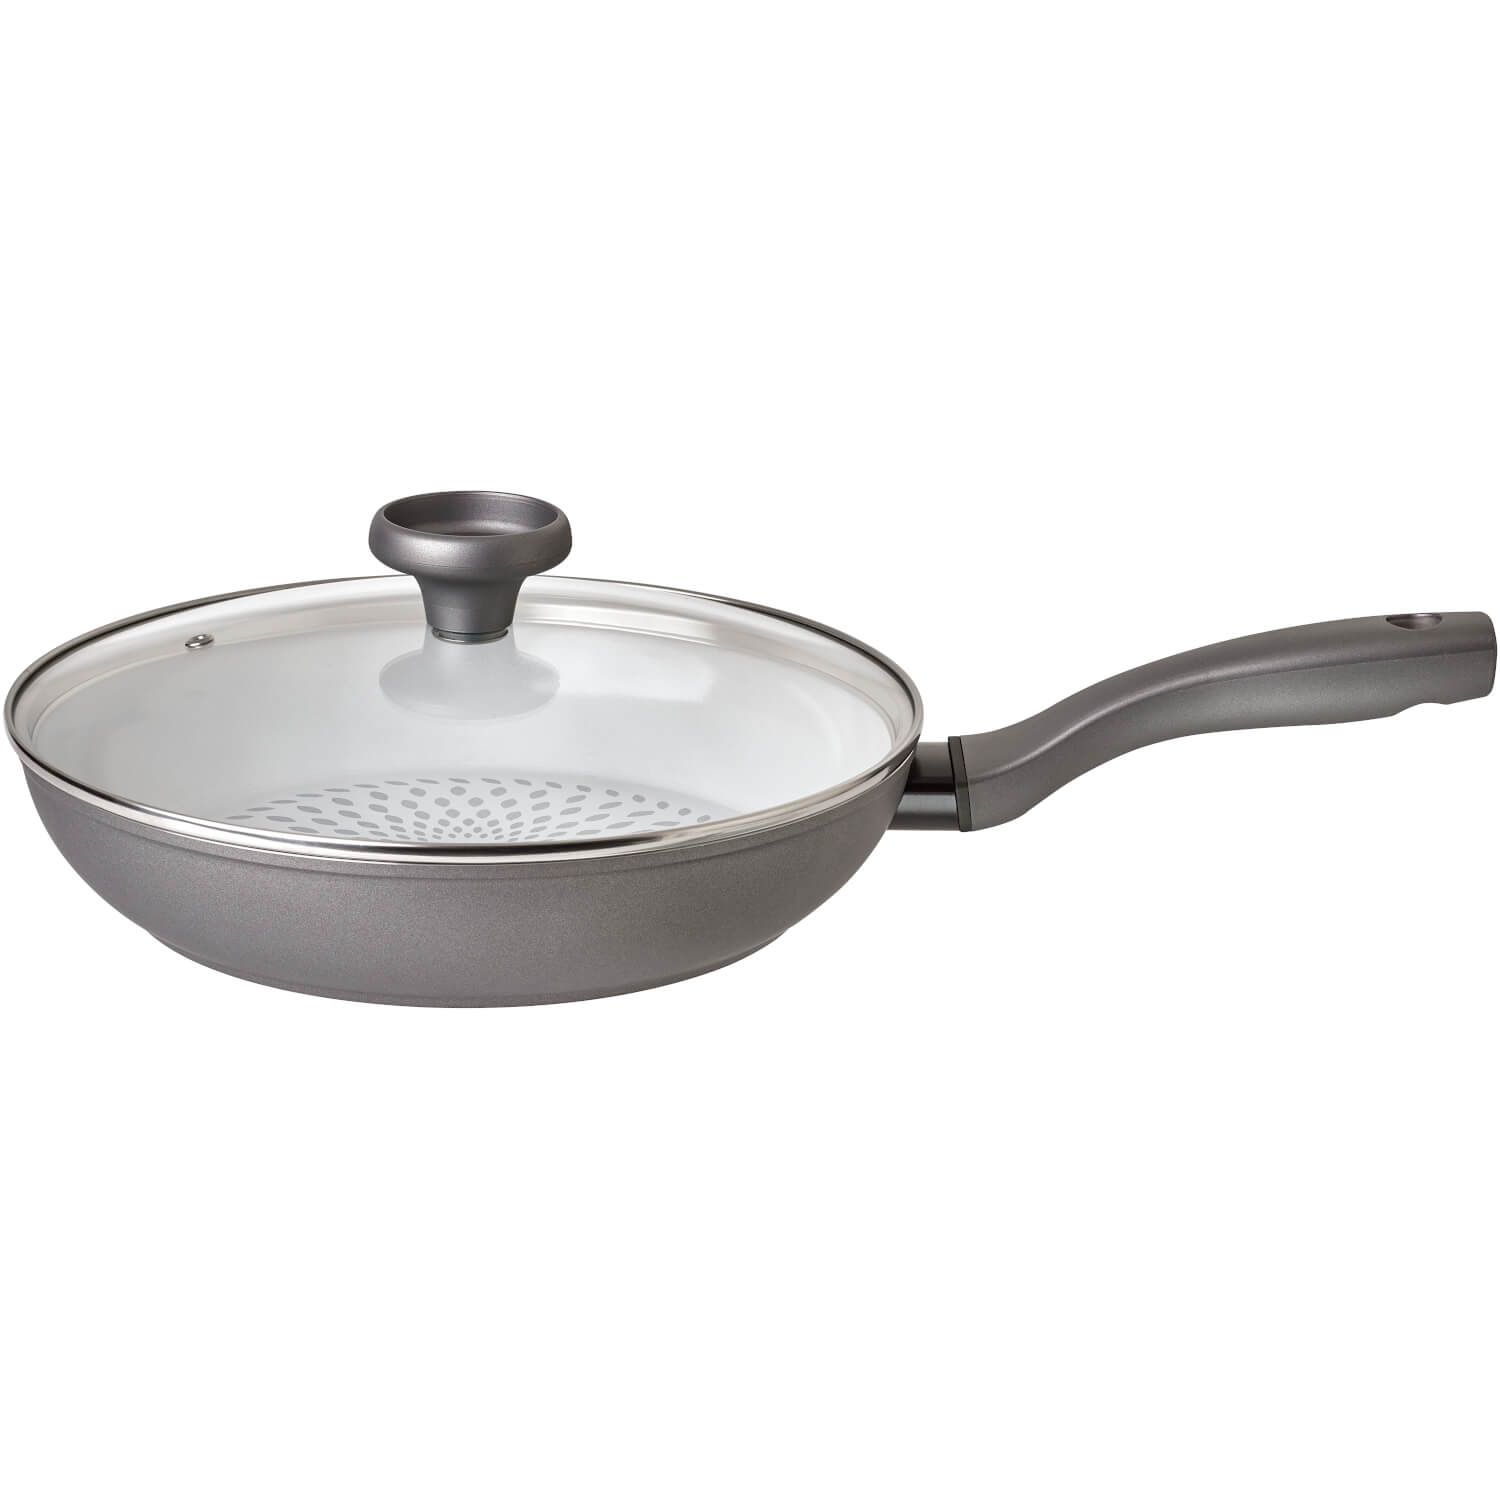 Meyers Earth Pan Covered Frypan - 28cm 1 Shaws Department Stores